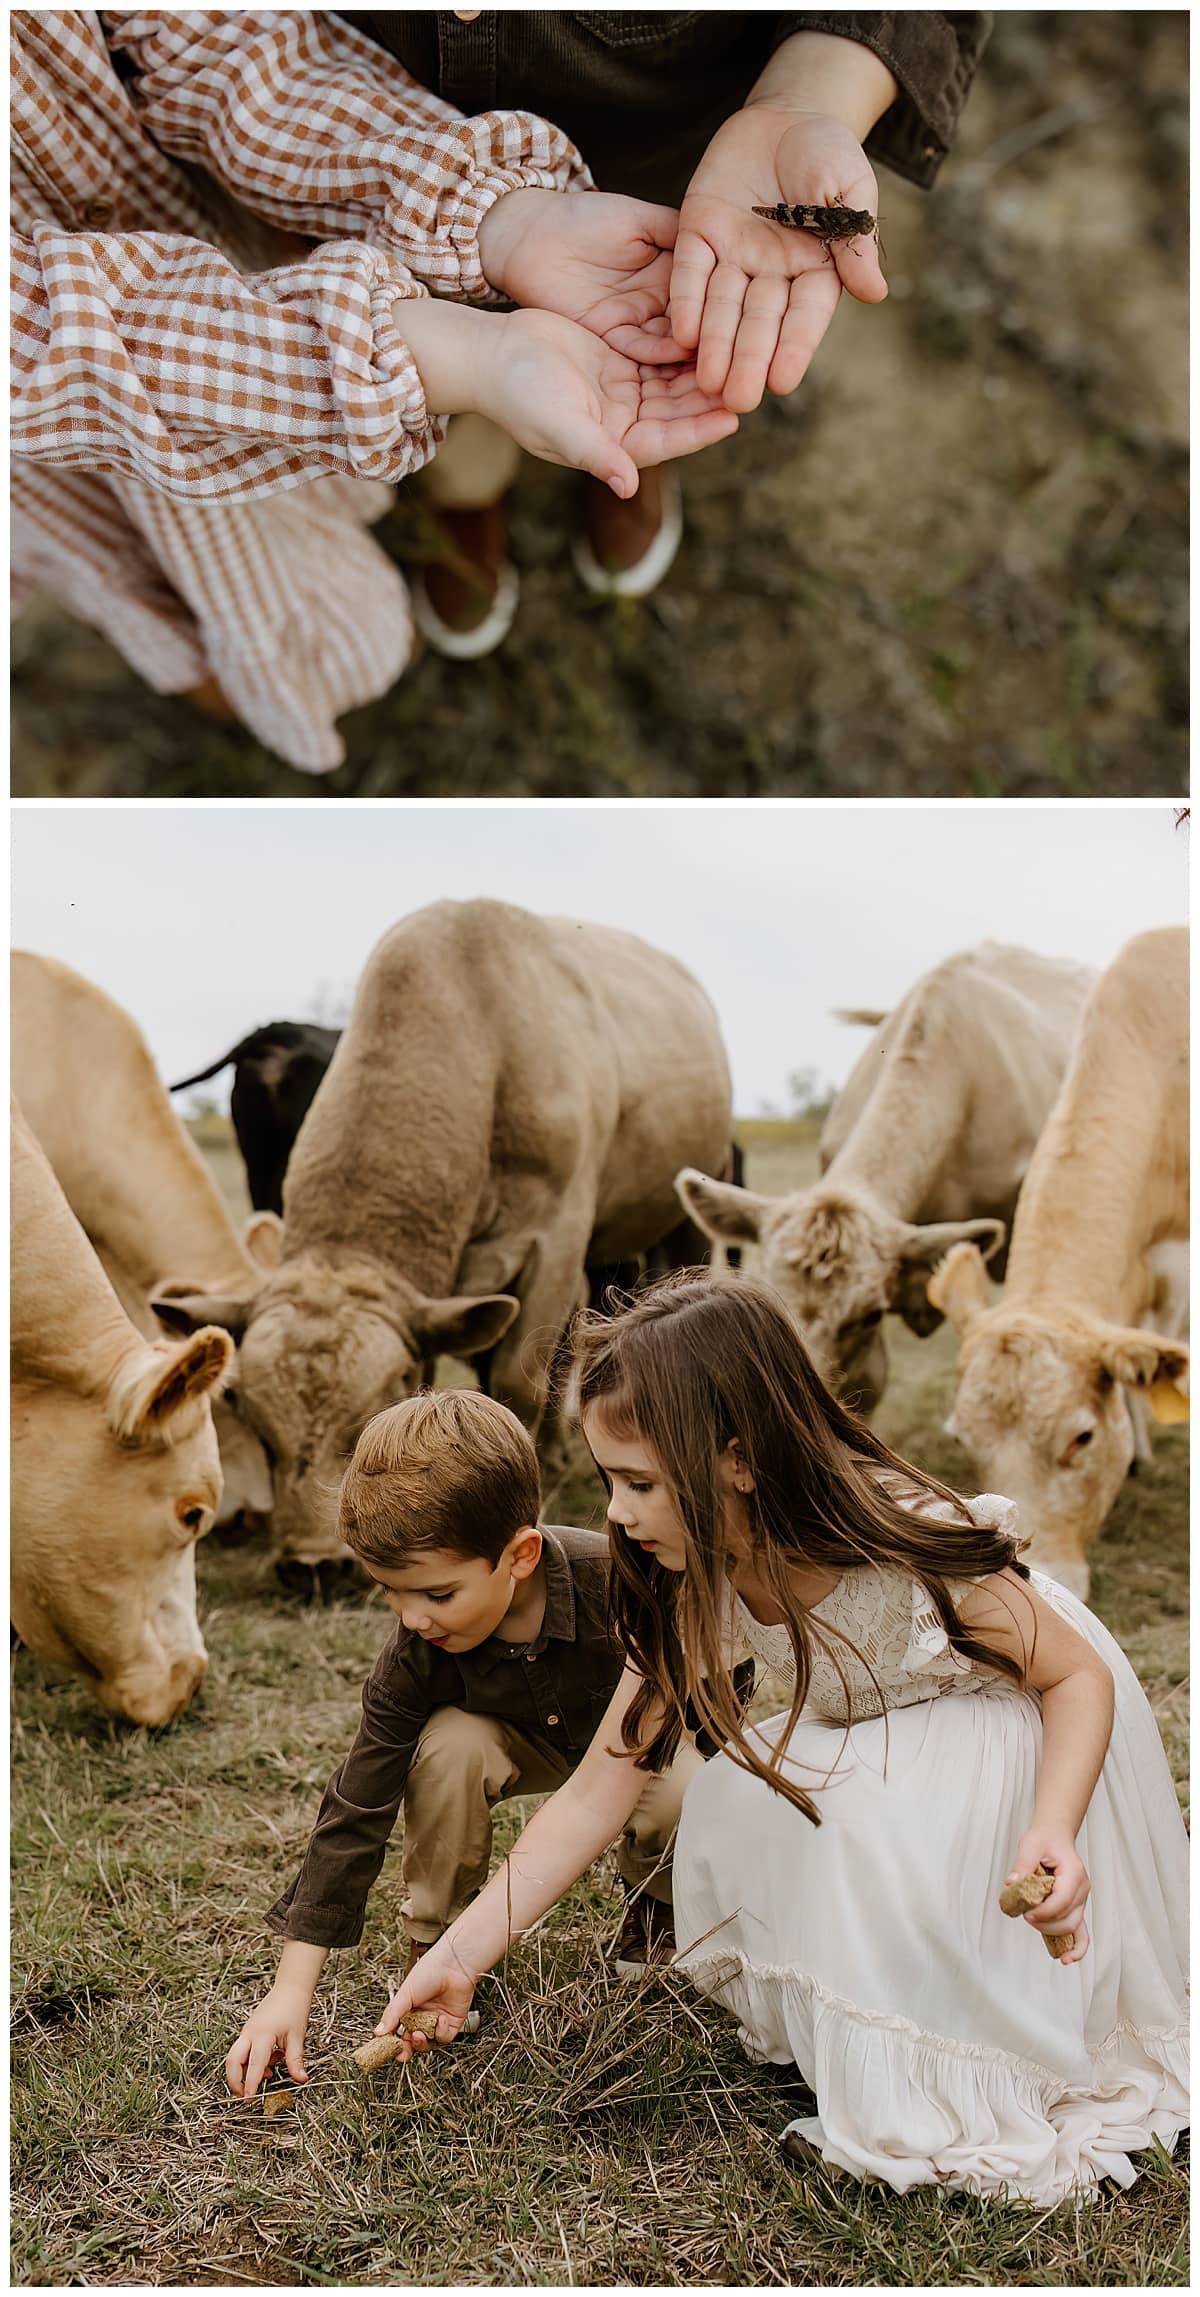 Kids play near the cows for Our Adventuring Souls Photography